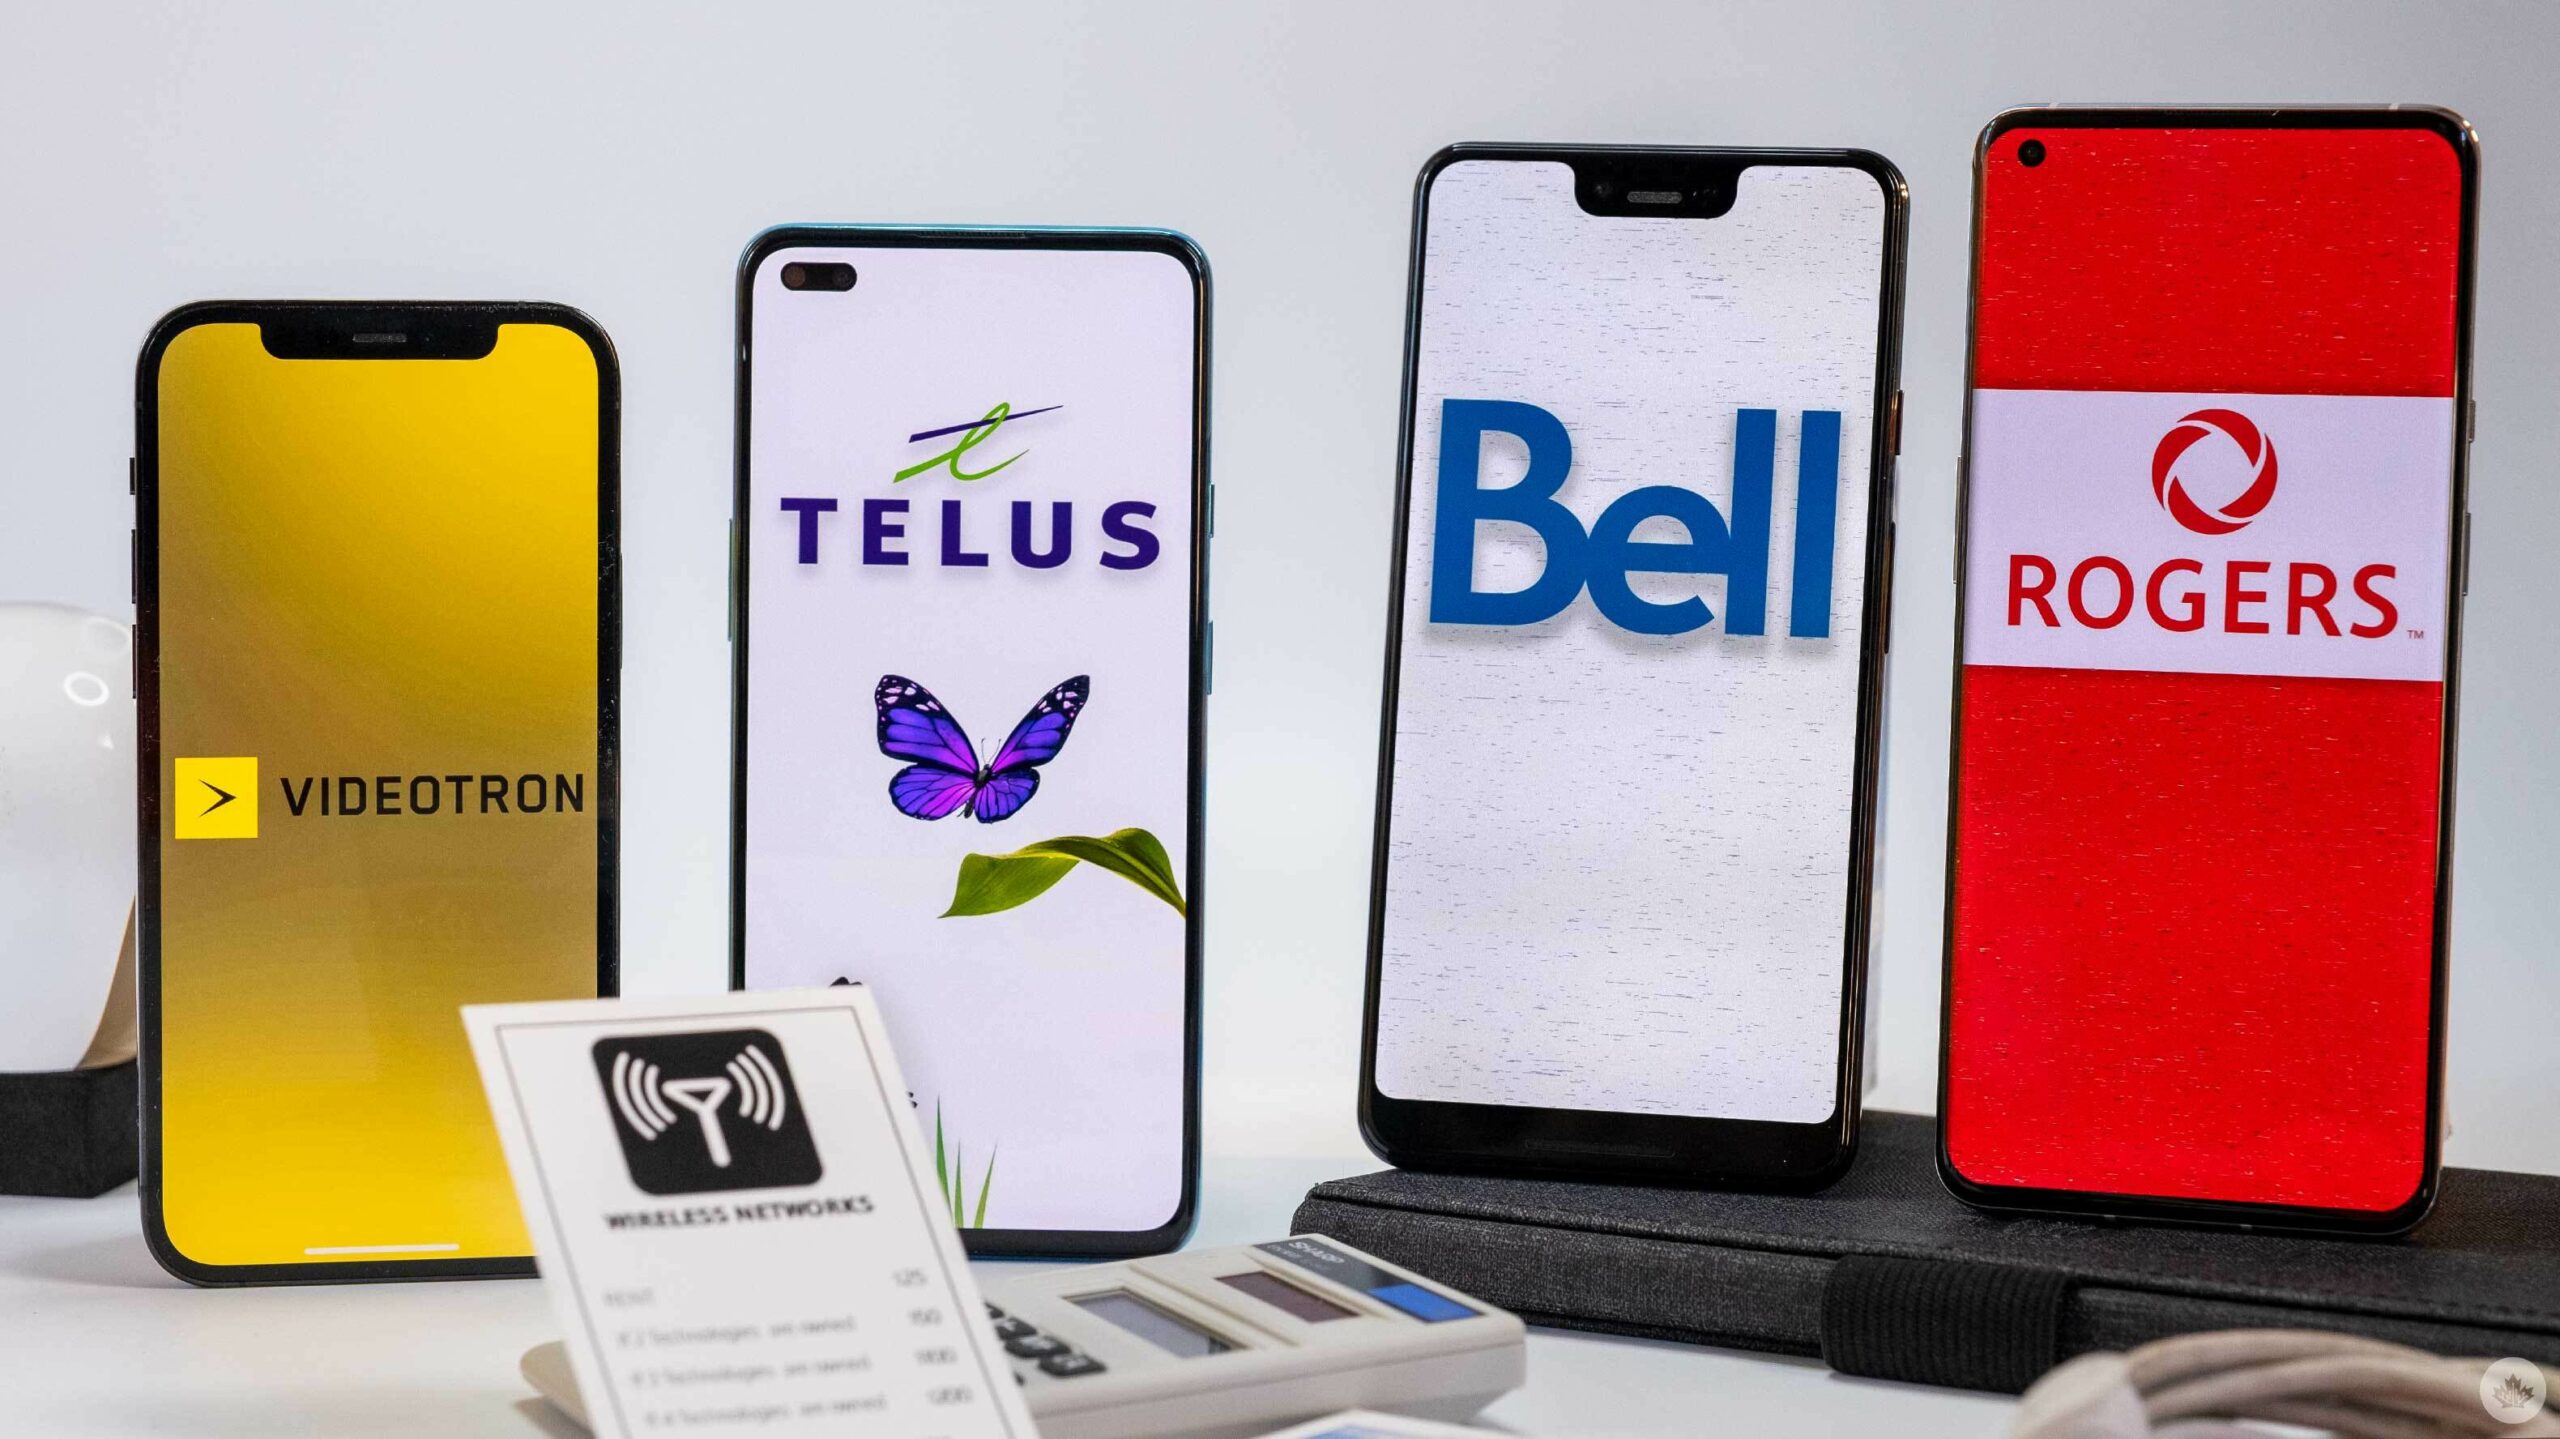 Bell, Rogers, Telus and Vidéotron logos on phones.